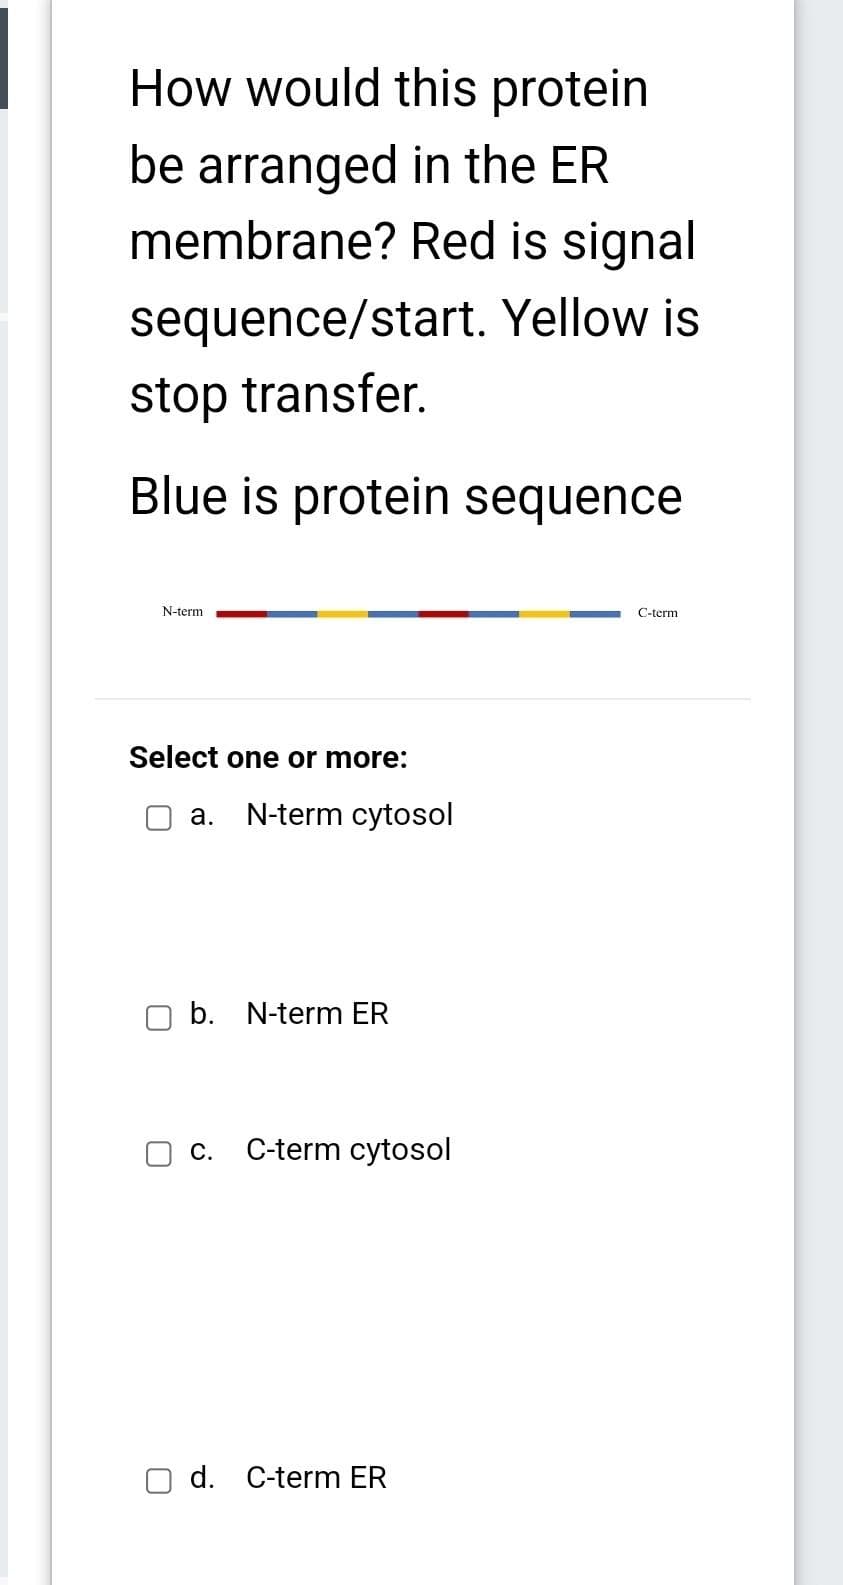 How would this protein
be arranged in the ER
membrane? Red is signal
sequence/start. Yellow is
stop transfer.
Blue is protein sequence
N-term
Select one or more:
a. N-term cytosol
b. N-term ER
C.
C-term cytosol
d. C-term ER
C-term